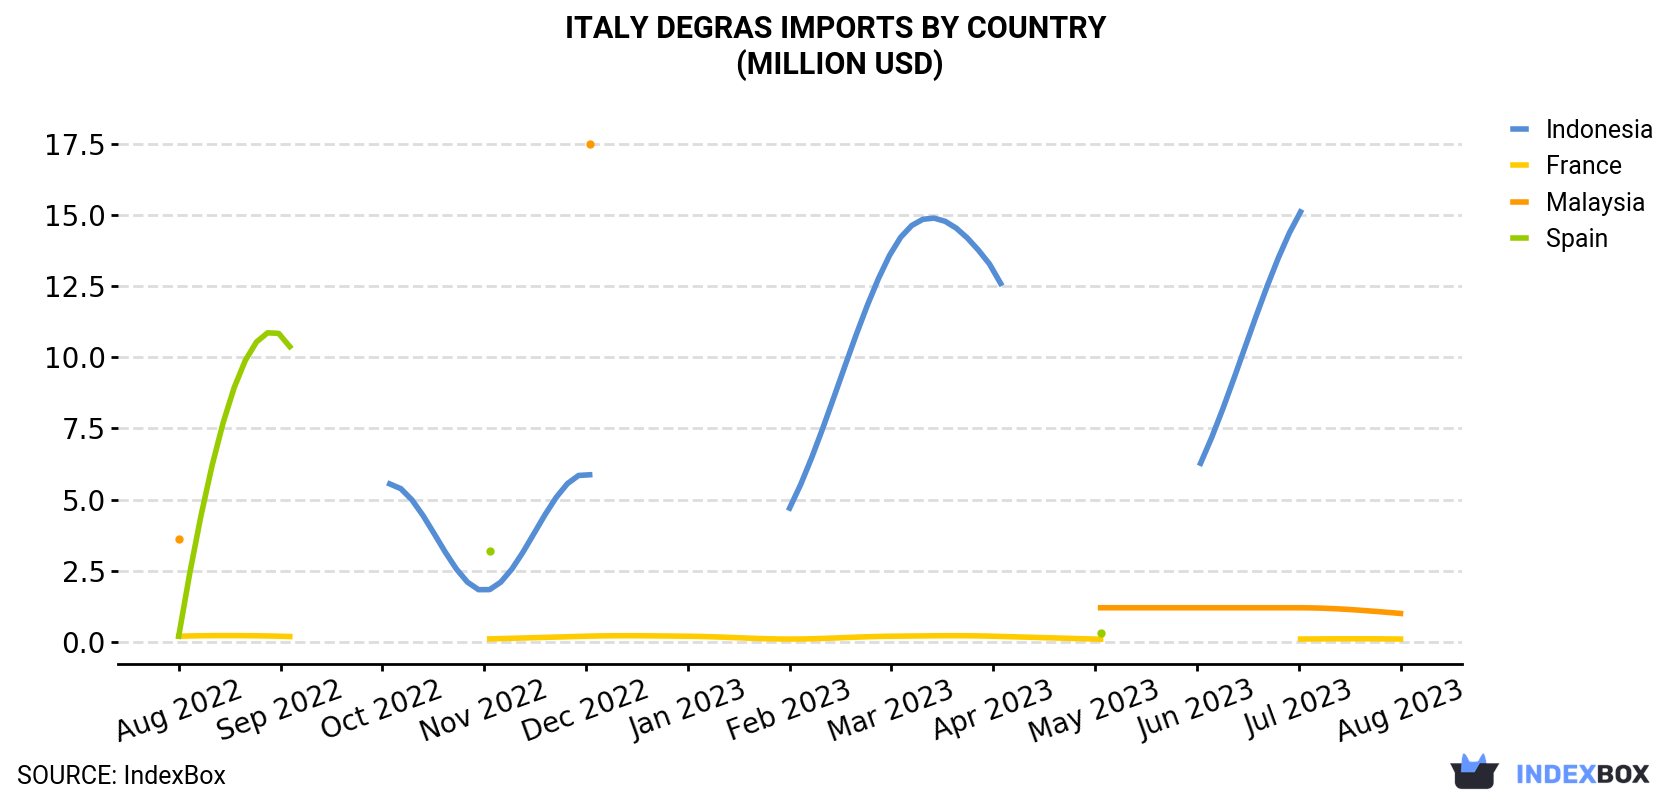 Italy Degras Imports By Country (Million USD)